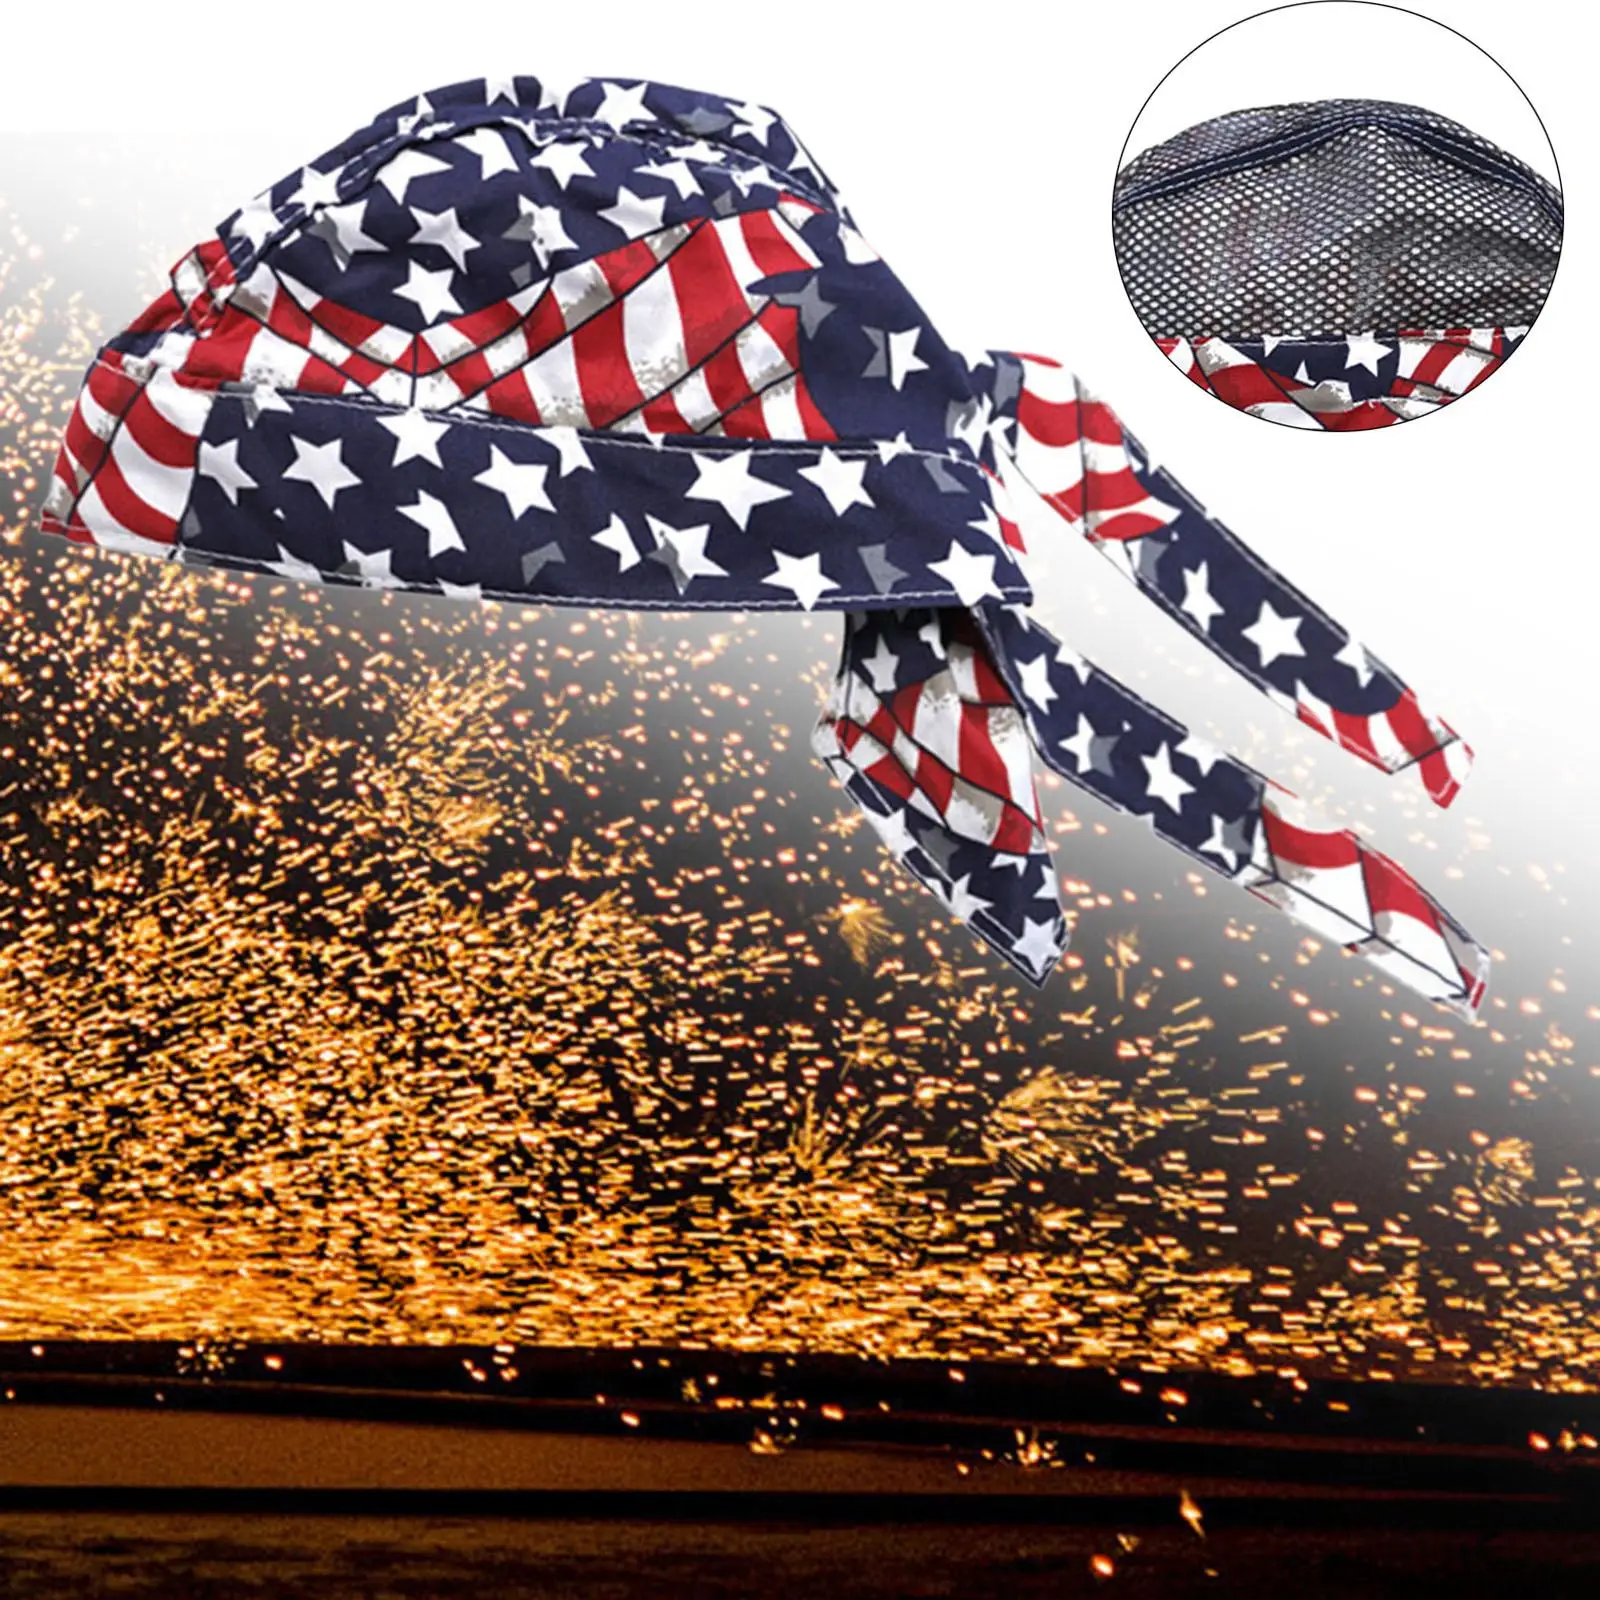 Welding Cap Washable Multifunctional Flame Retardant Protective for Running Training Mountain Climbing Boating Outdoor Sports